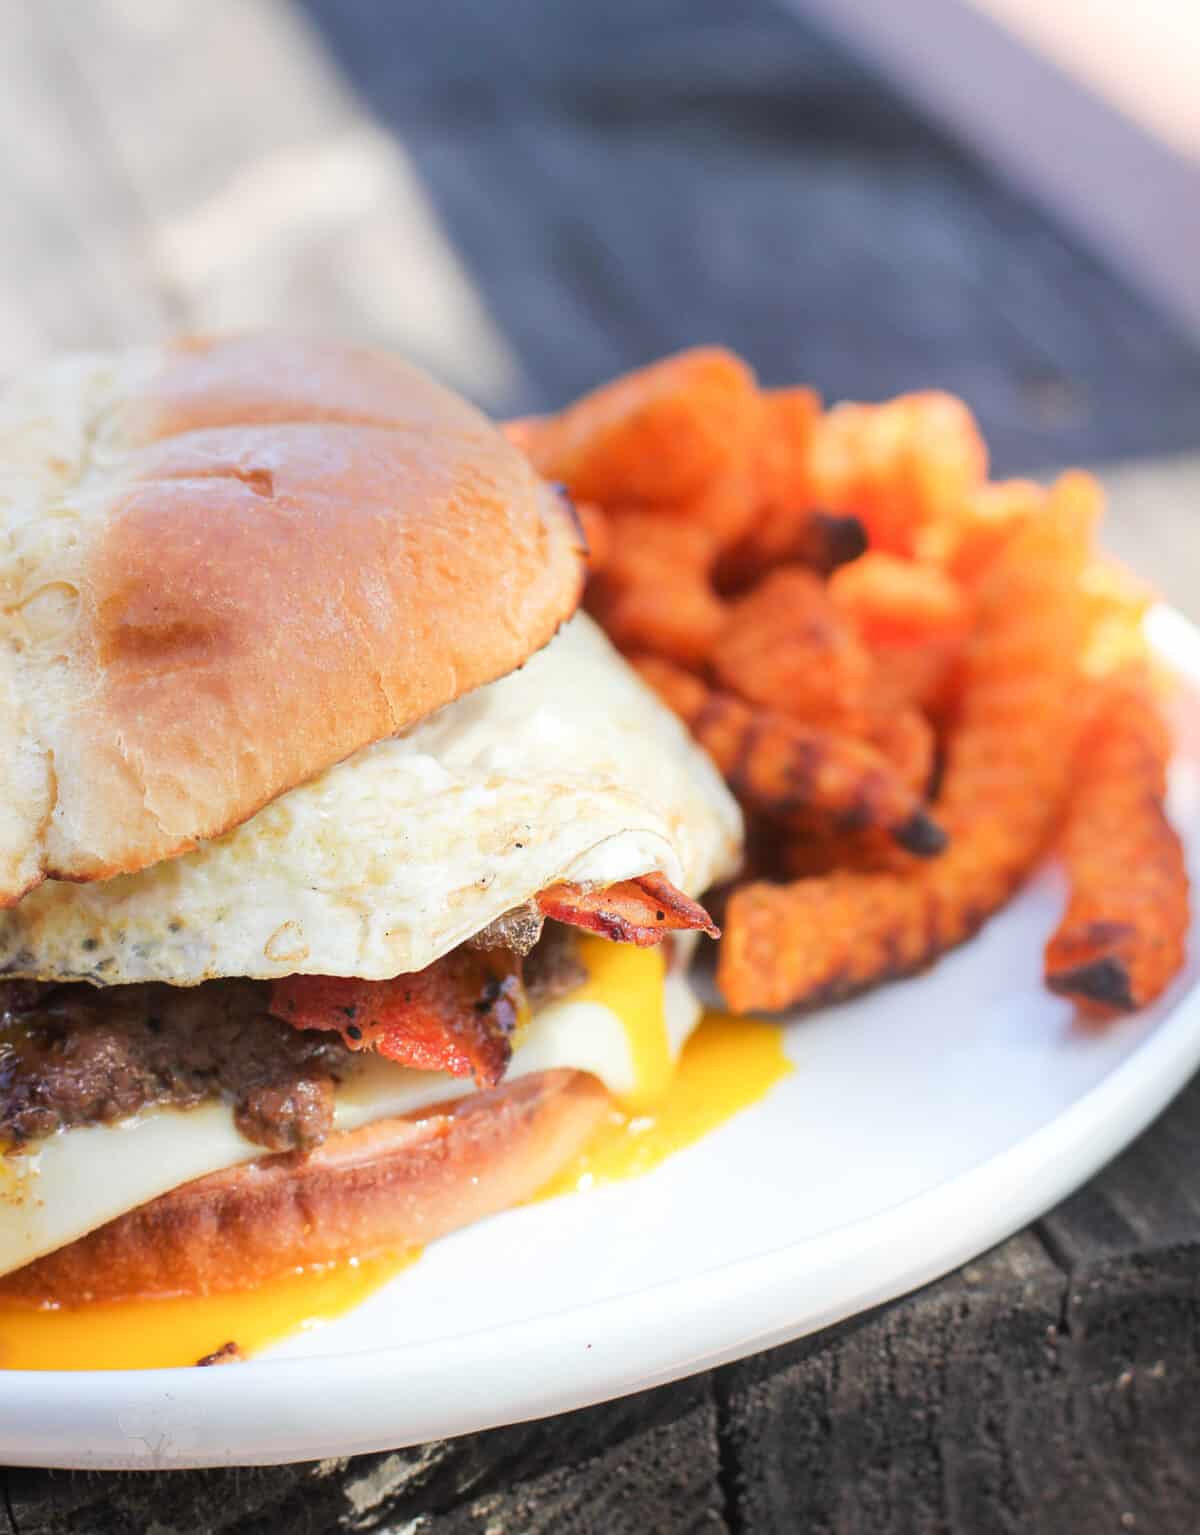 prepared hangover burger on plate with sweet potato fries